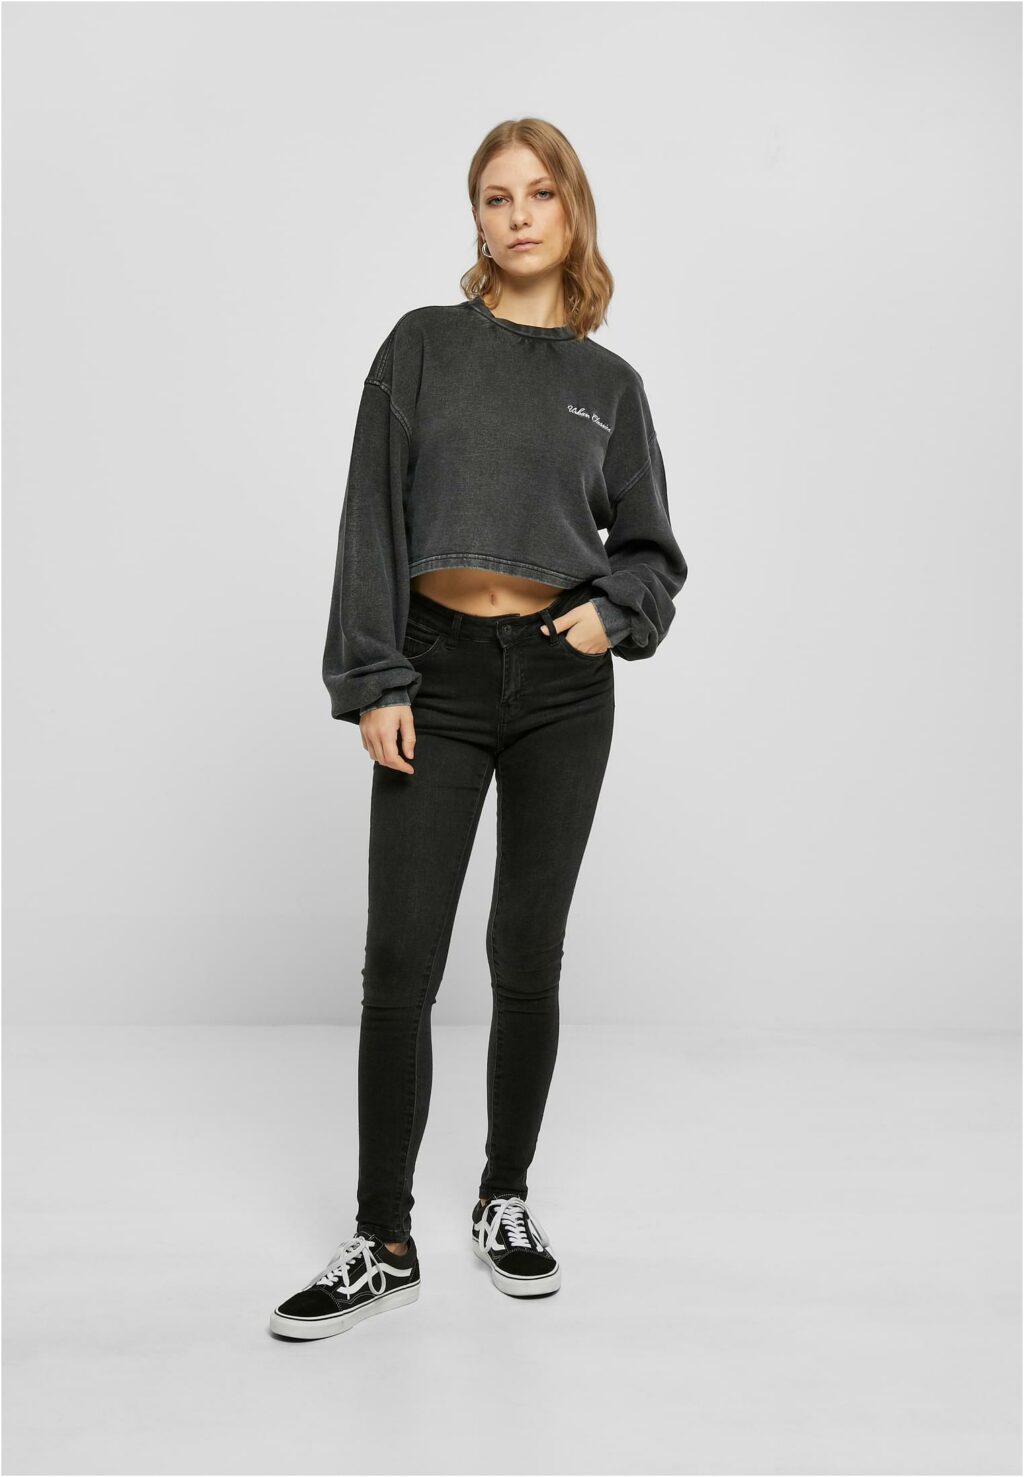 Urban Classics Ladies Cropped Small Embroidery Terry Crewneck black TB5461